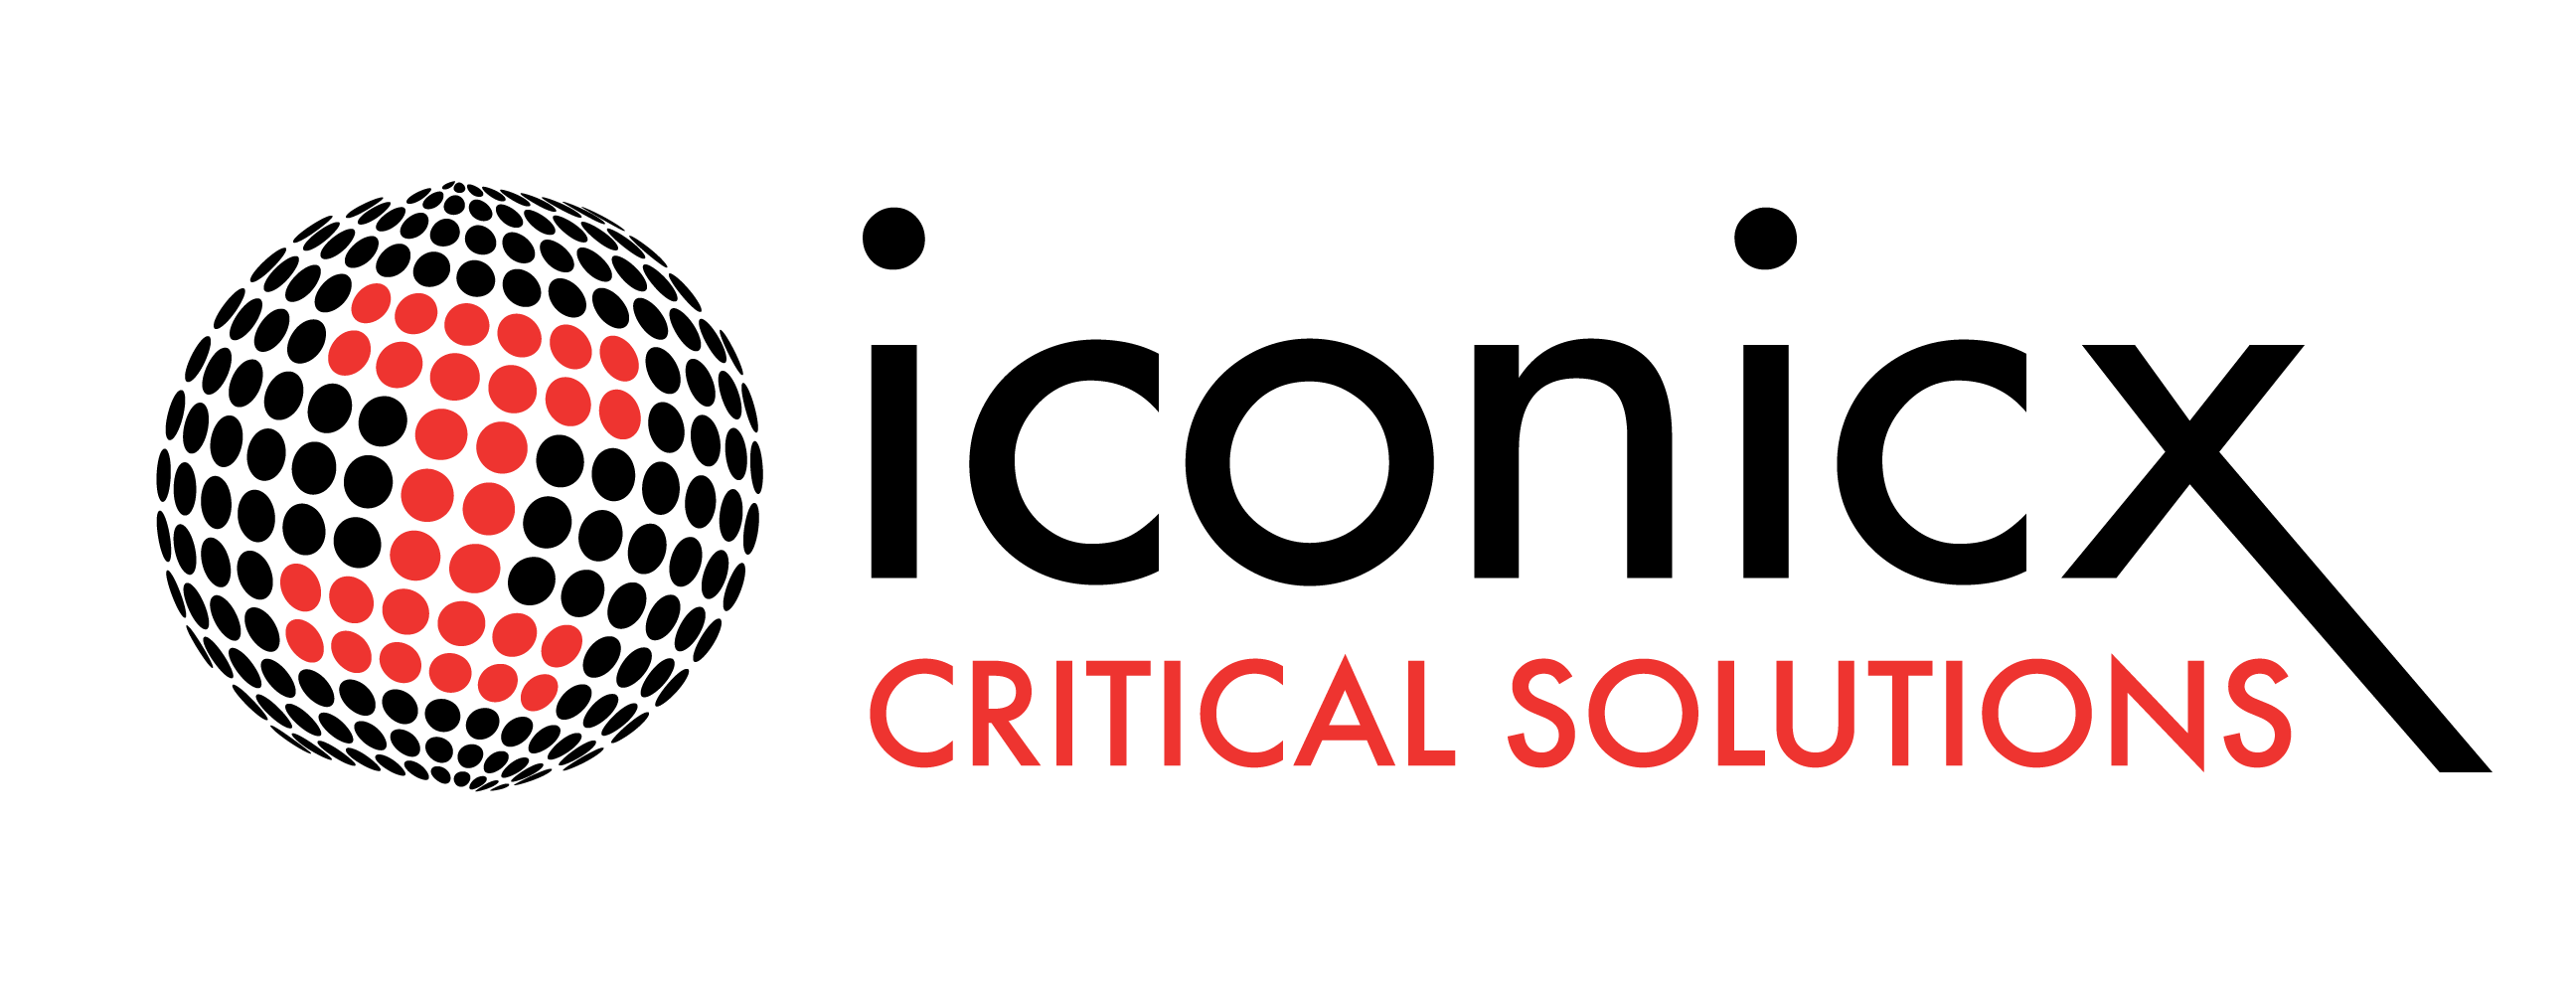 Iconicx Critical Solutions logo